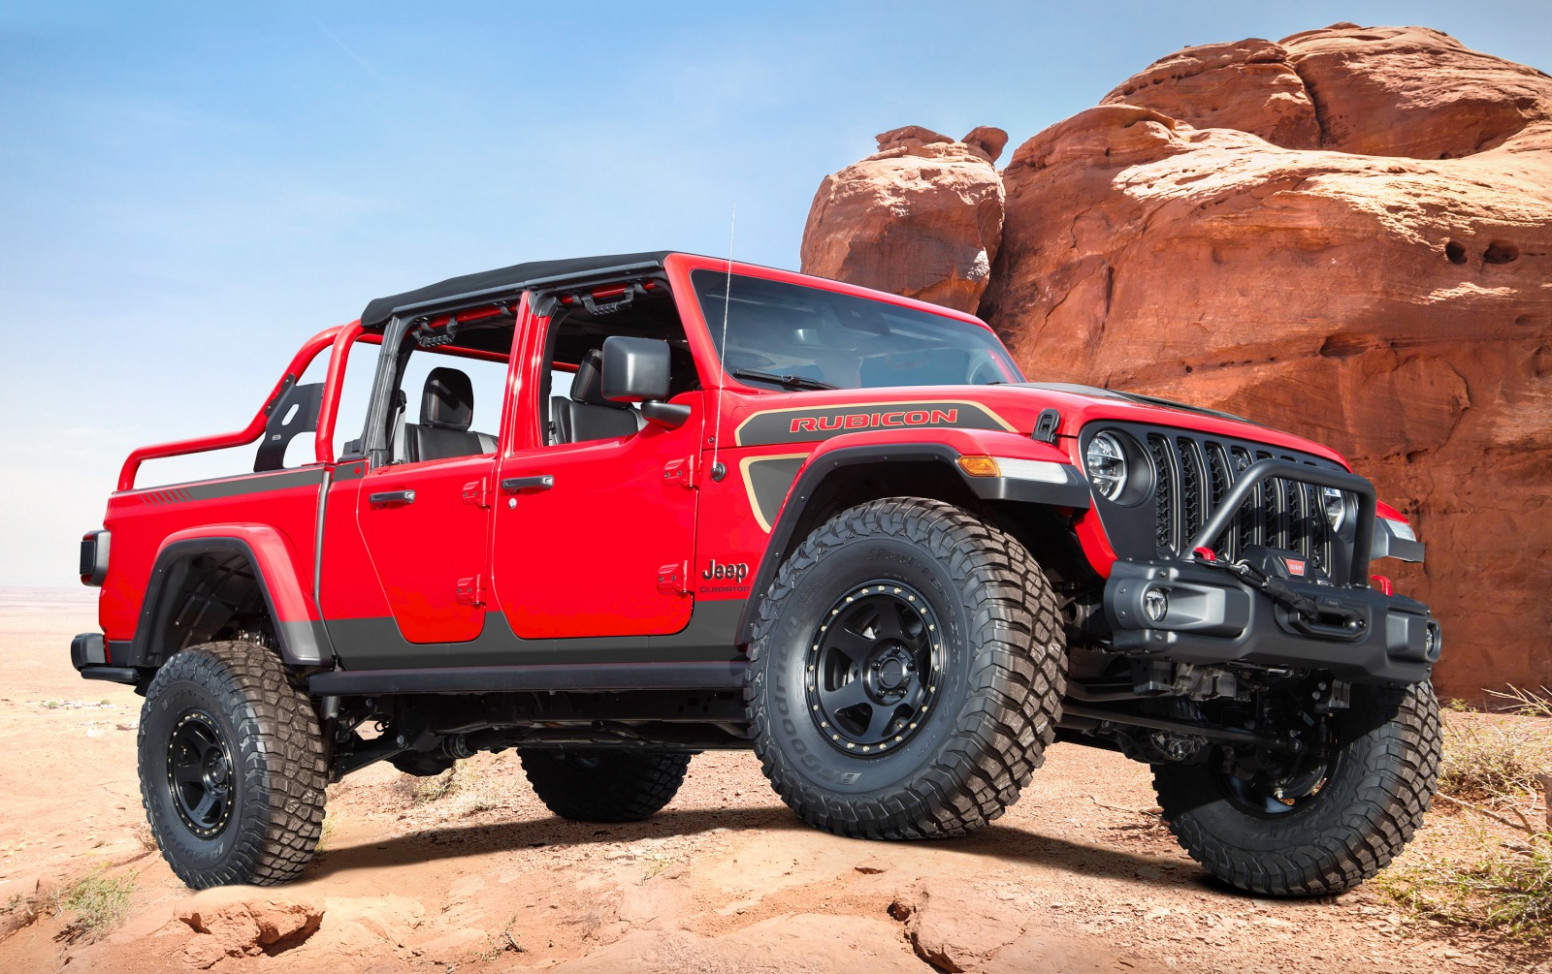 Release Date When Will The 2023 Jeep Gladiator Be Available